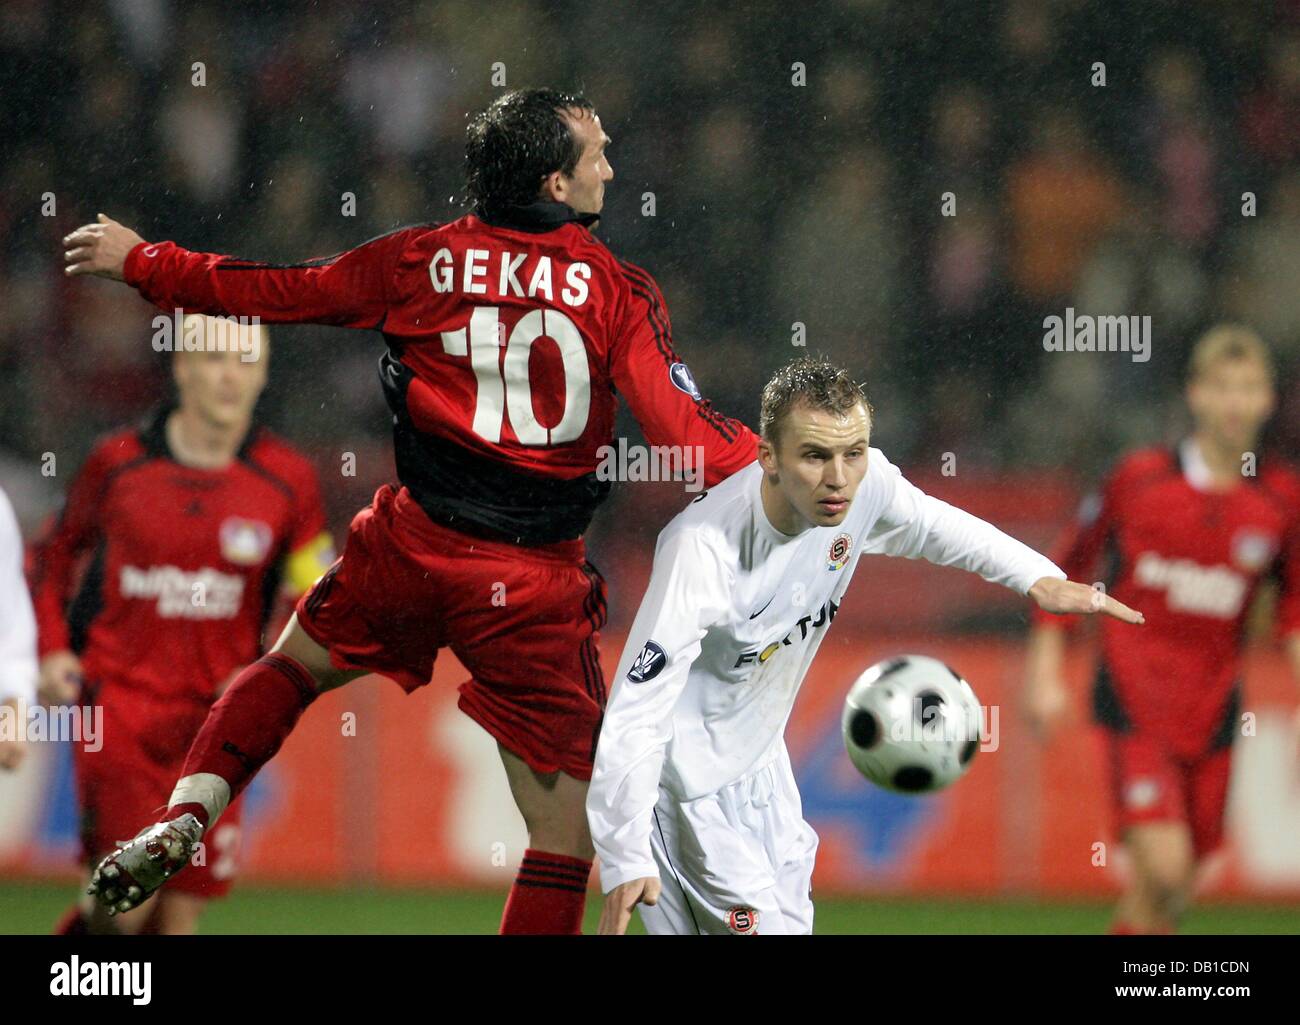 Theofanis Gekas (L) of Bayer 04 Leverkusen vies for the ball with Michal Kadlec of AC Sparta Praha during the group E UEFA Cup match at BayArena in Leverkusen, Germany, 06 December 2007. Leverkusen defeated Sparta 1-0. Photo: Federico Gambarini Stock Photo